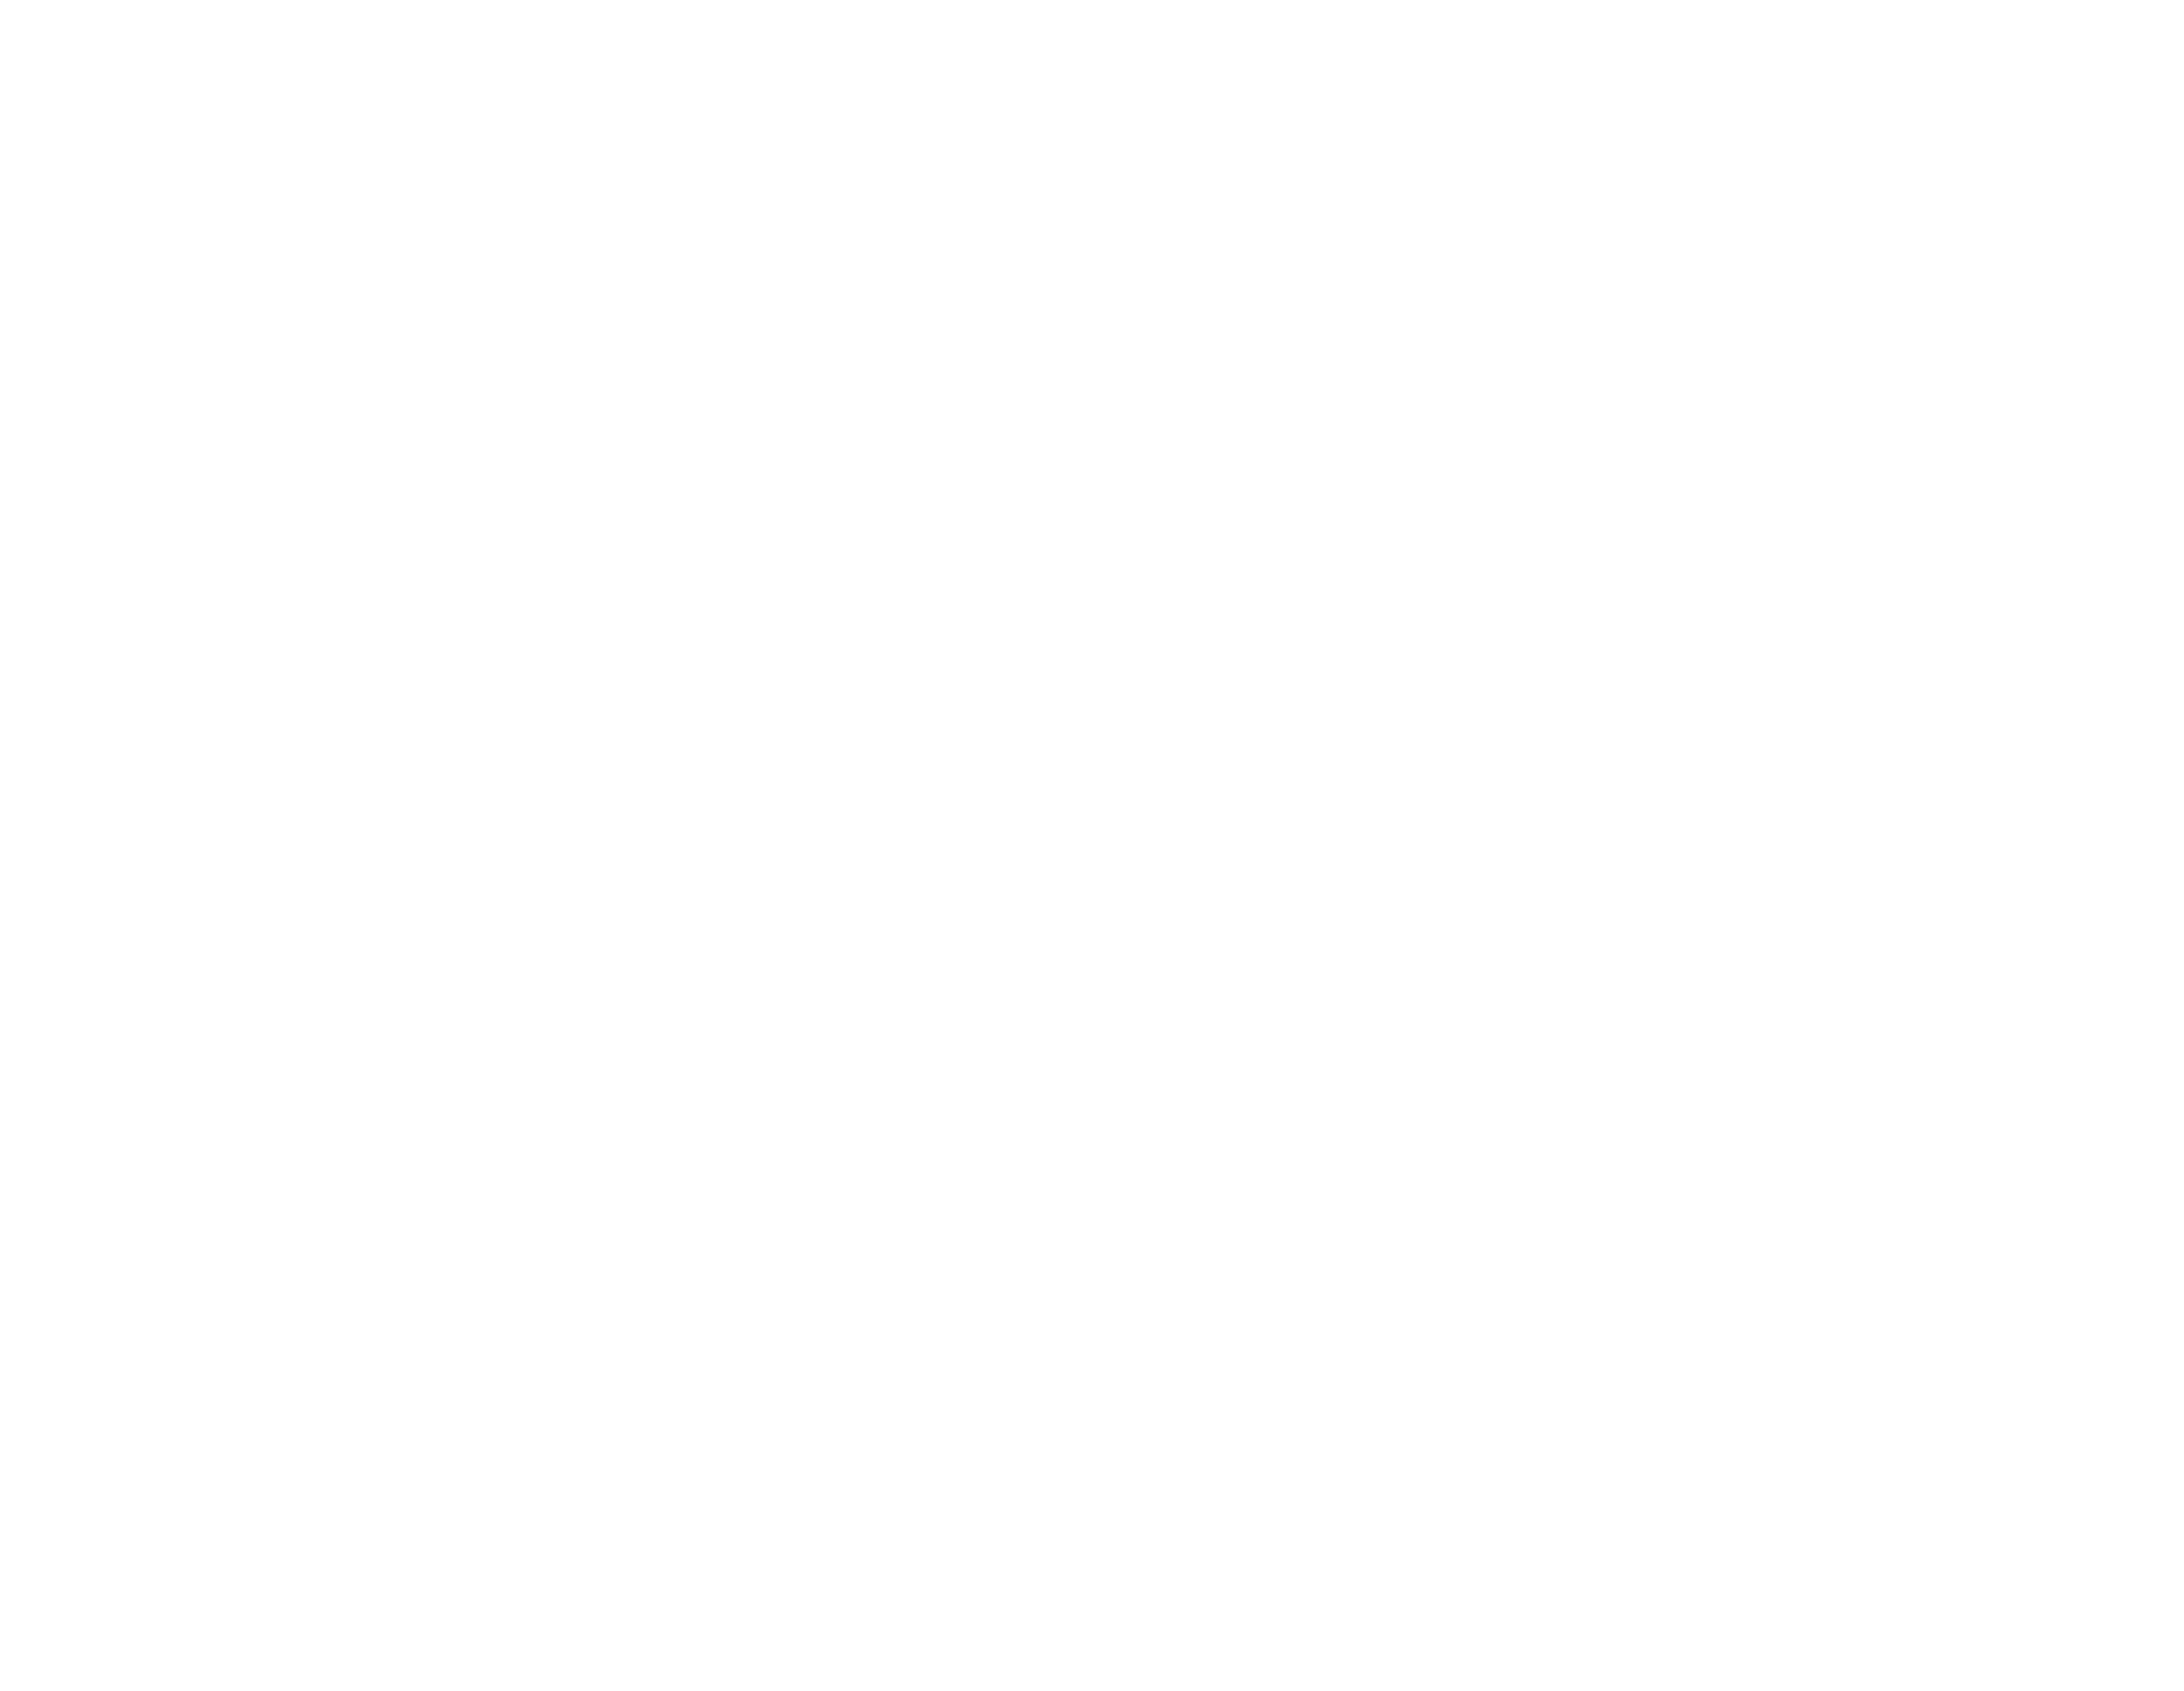 HL space